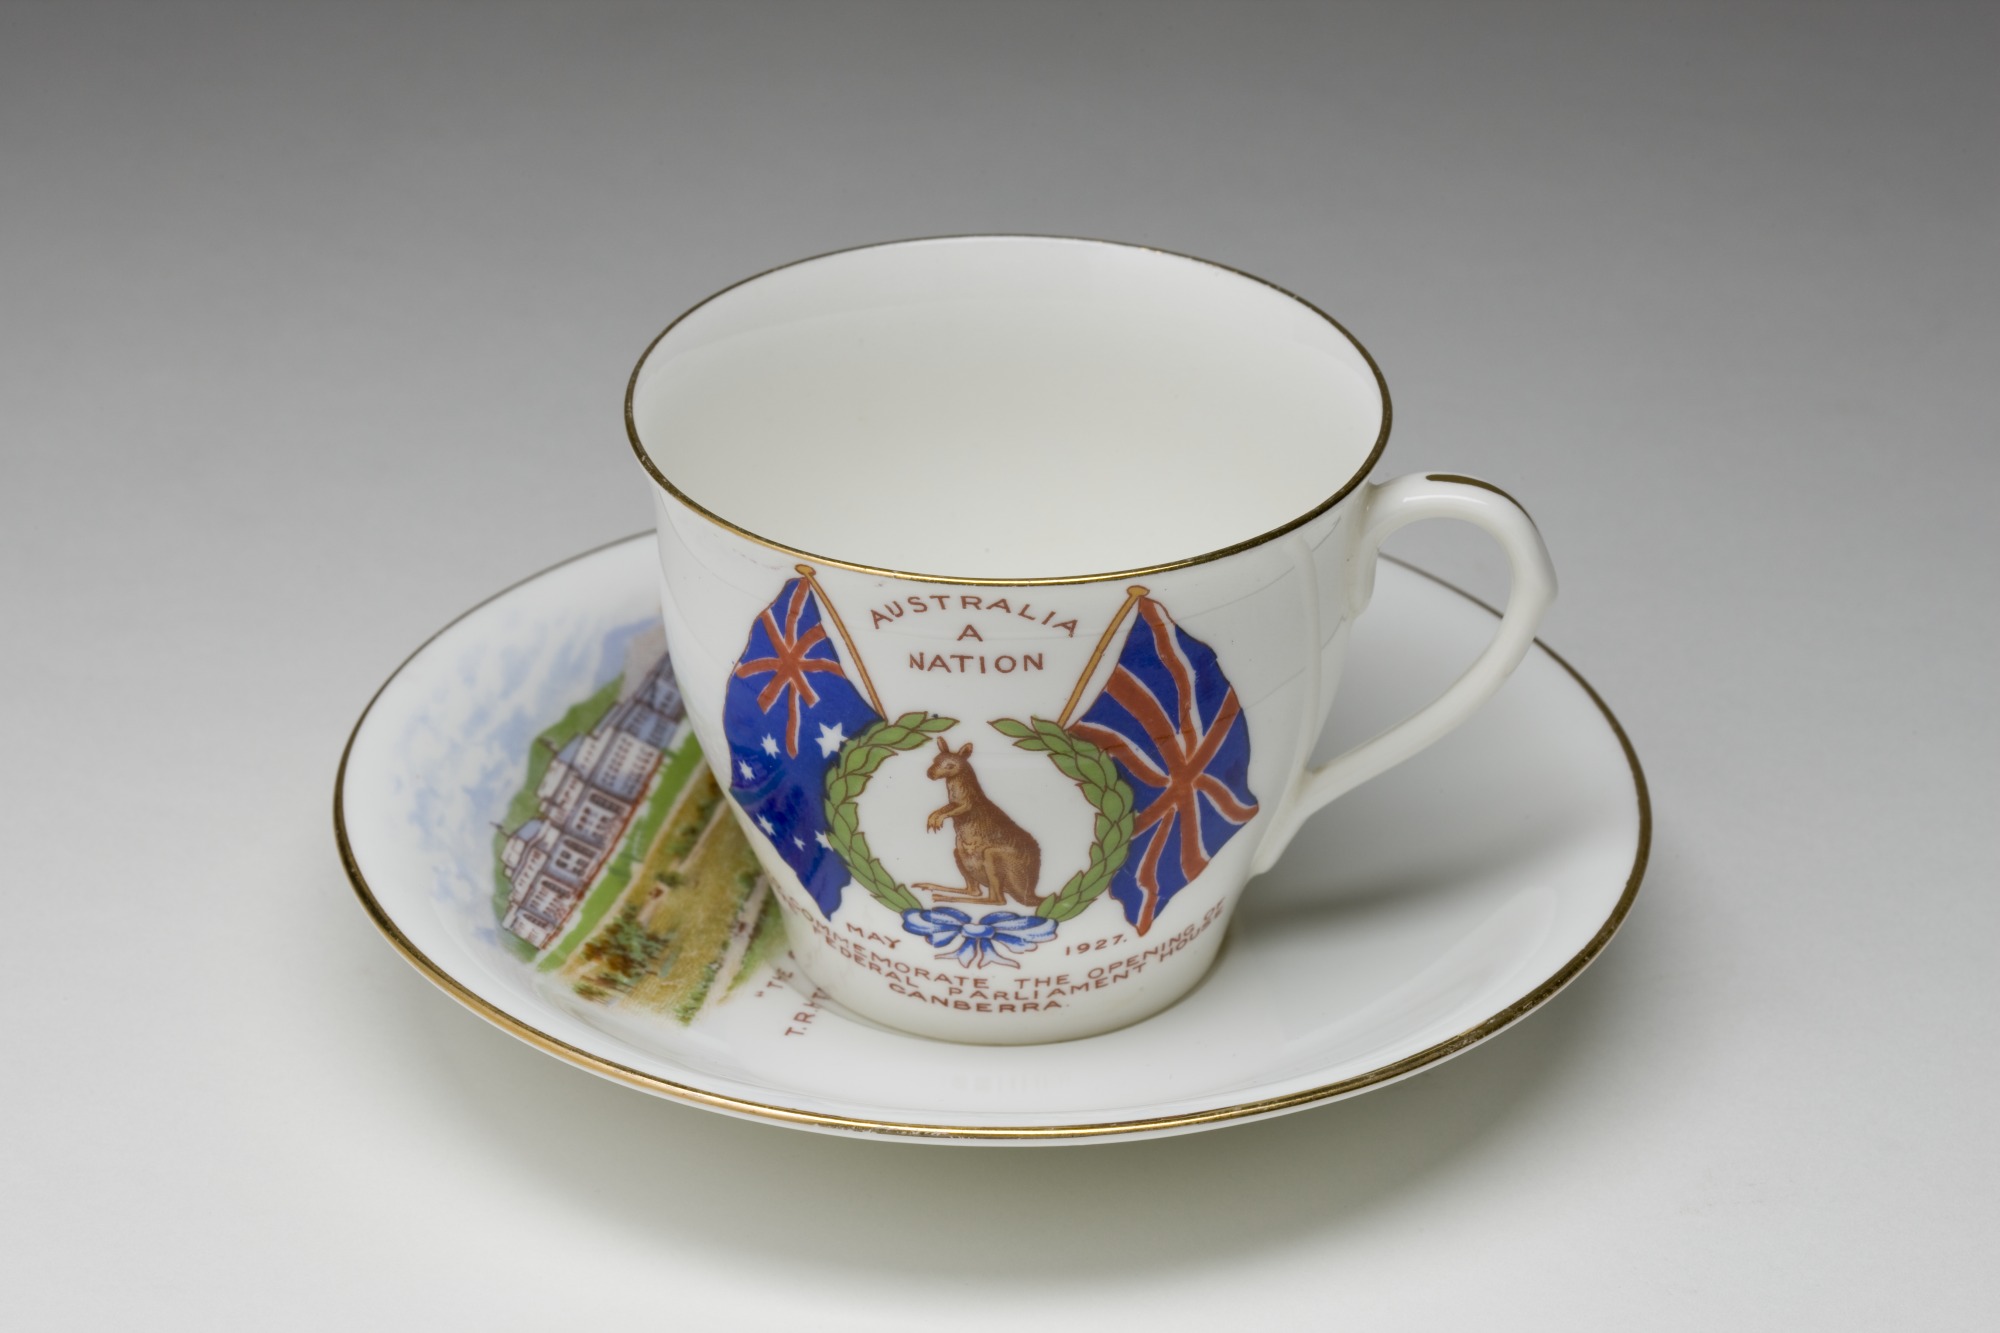 Souvenir white china cup and saucer commemorating the opening of Parliament House, Canberra, 9 May 1927.